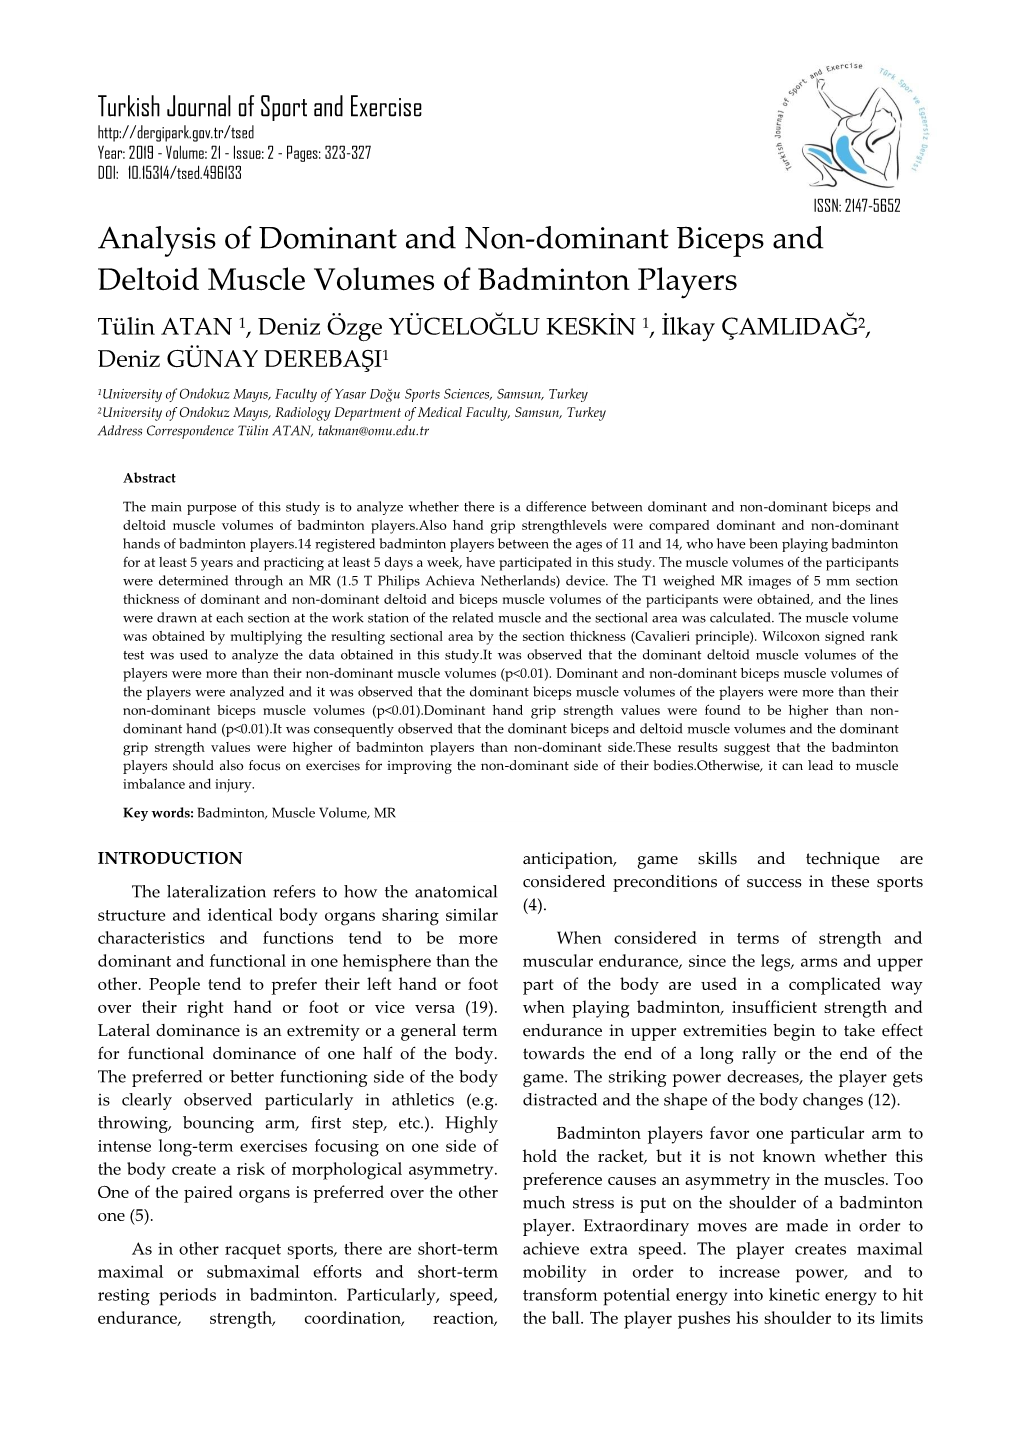 Analysis of Dominant and Non-Dominant Biceps and Deltoid